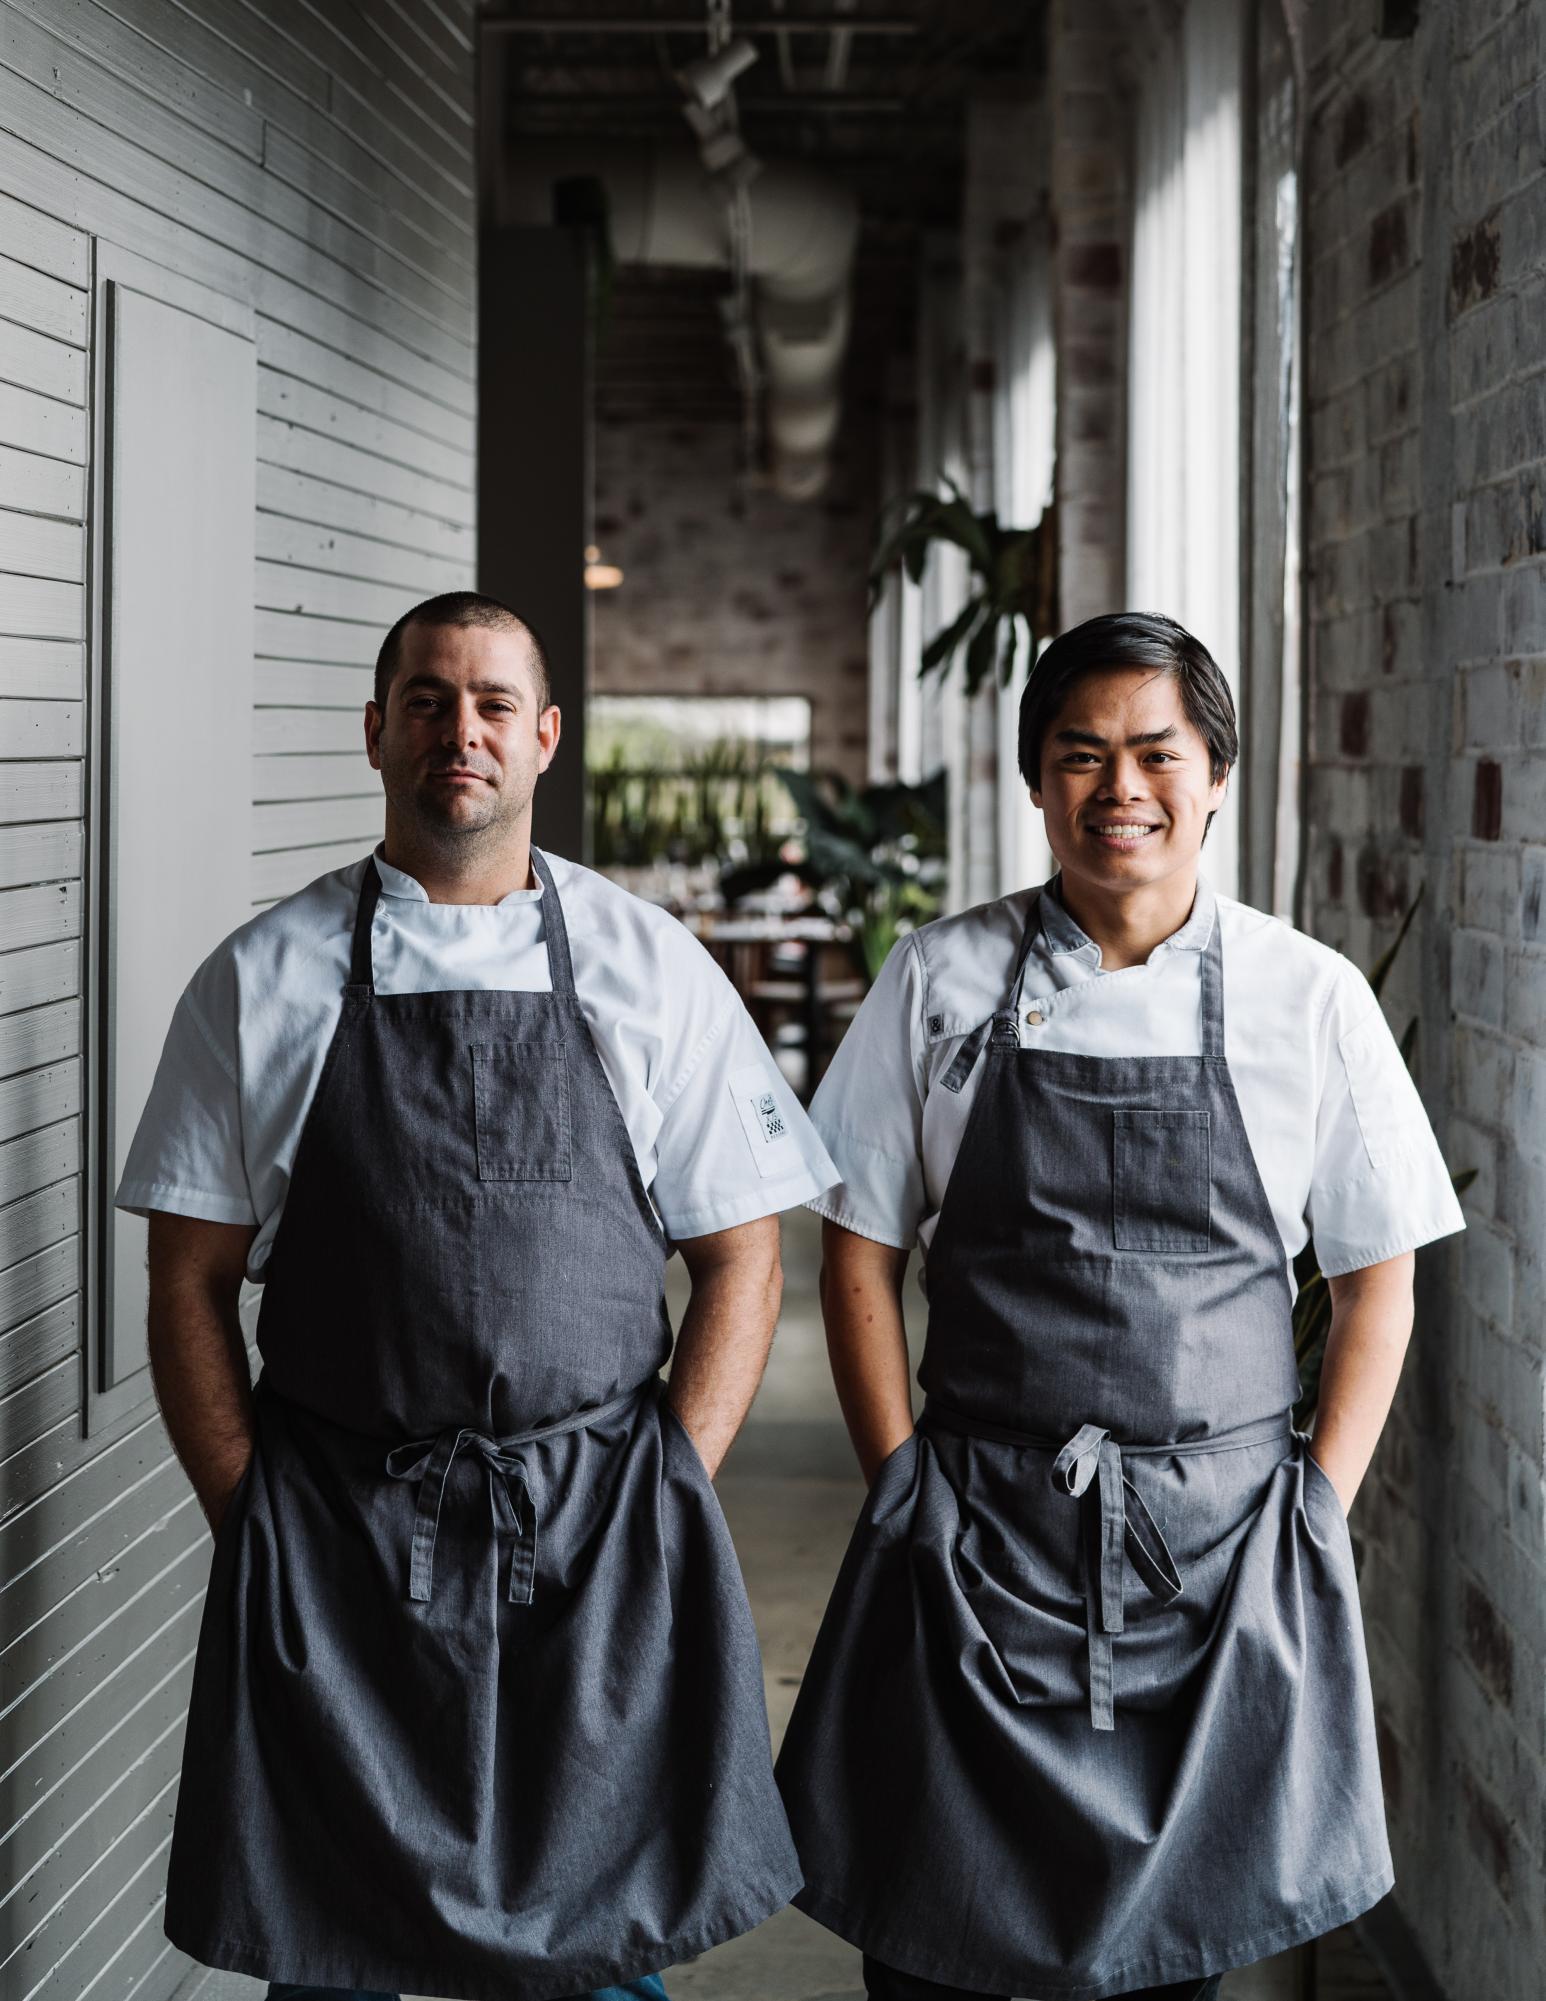 After moving from New York to open a restaurant, friends and colleagues Aaron Phillips (left) and Ronald Hsu
(right) came to Atlanta. With its name inspired by Hsu’s mother Betty, Lazy Betty, located in Inman Park, opened in 2019 and now has a MICHELIN star. The restaurant’s food is described as global eclectic with an evolving menu, Executive Chef and Co-Owner Phillips said.